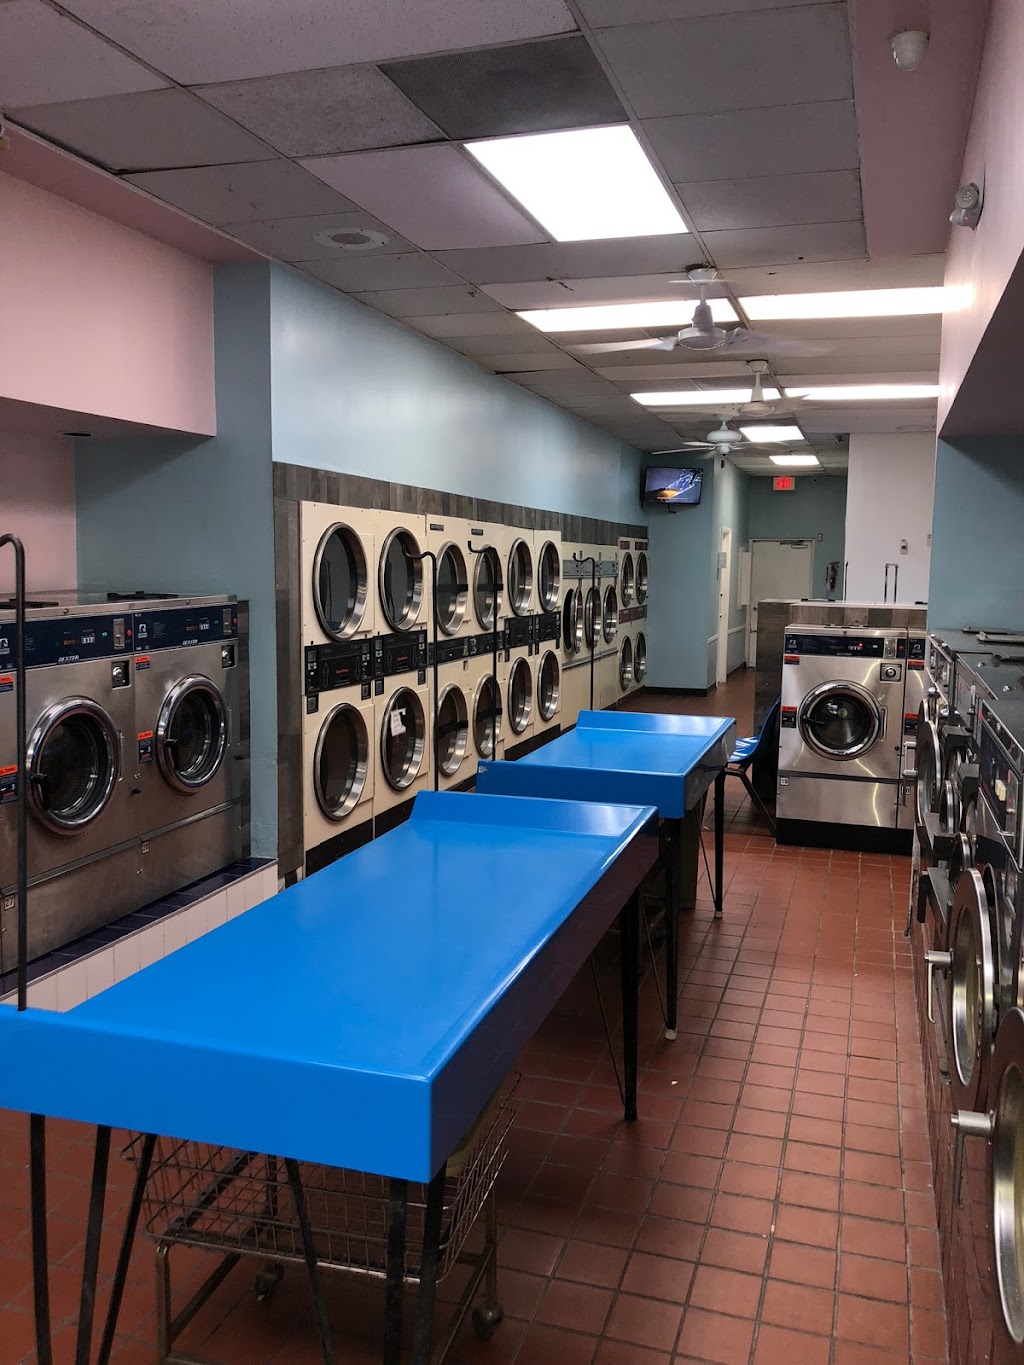 Wash and Fold - Dry Cleaner & Coin Laundry | 15070 Sunset Dr, Miami, FL 33193, USA | Phone: (305) 387-3480